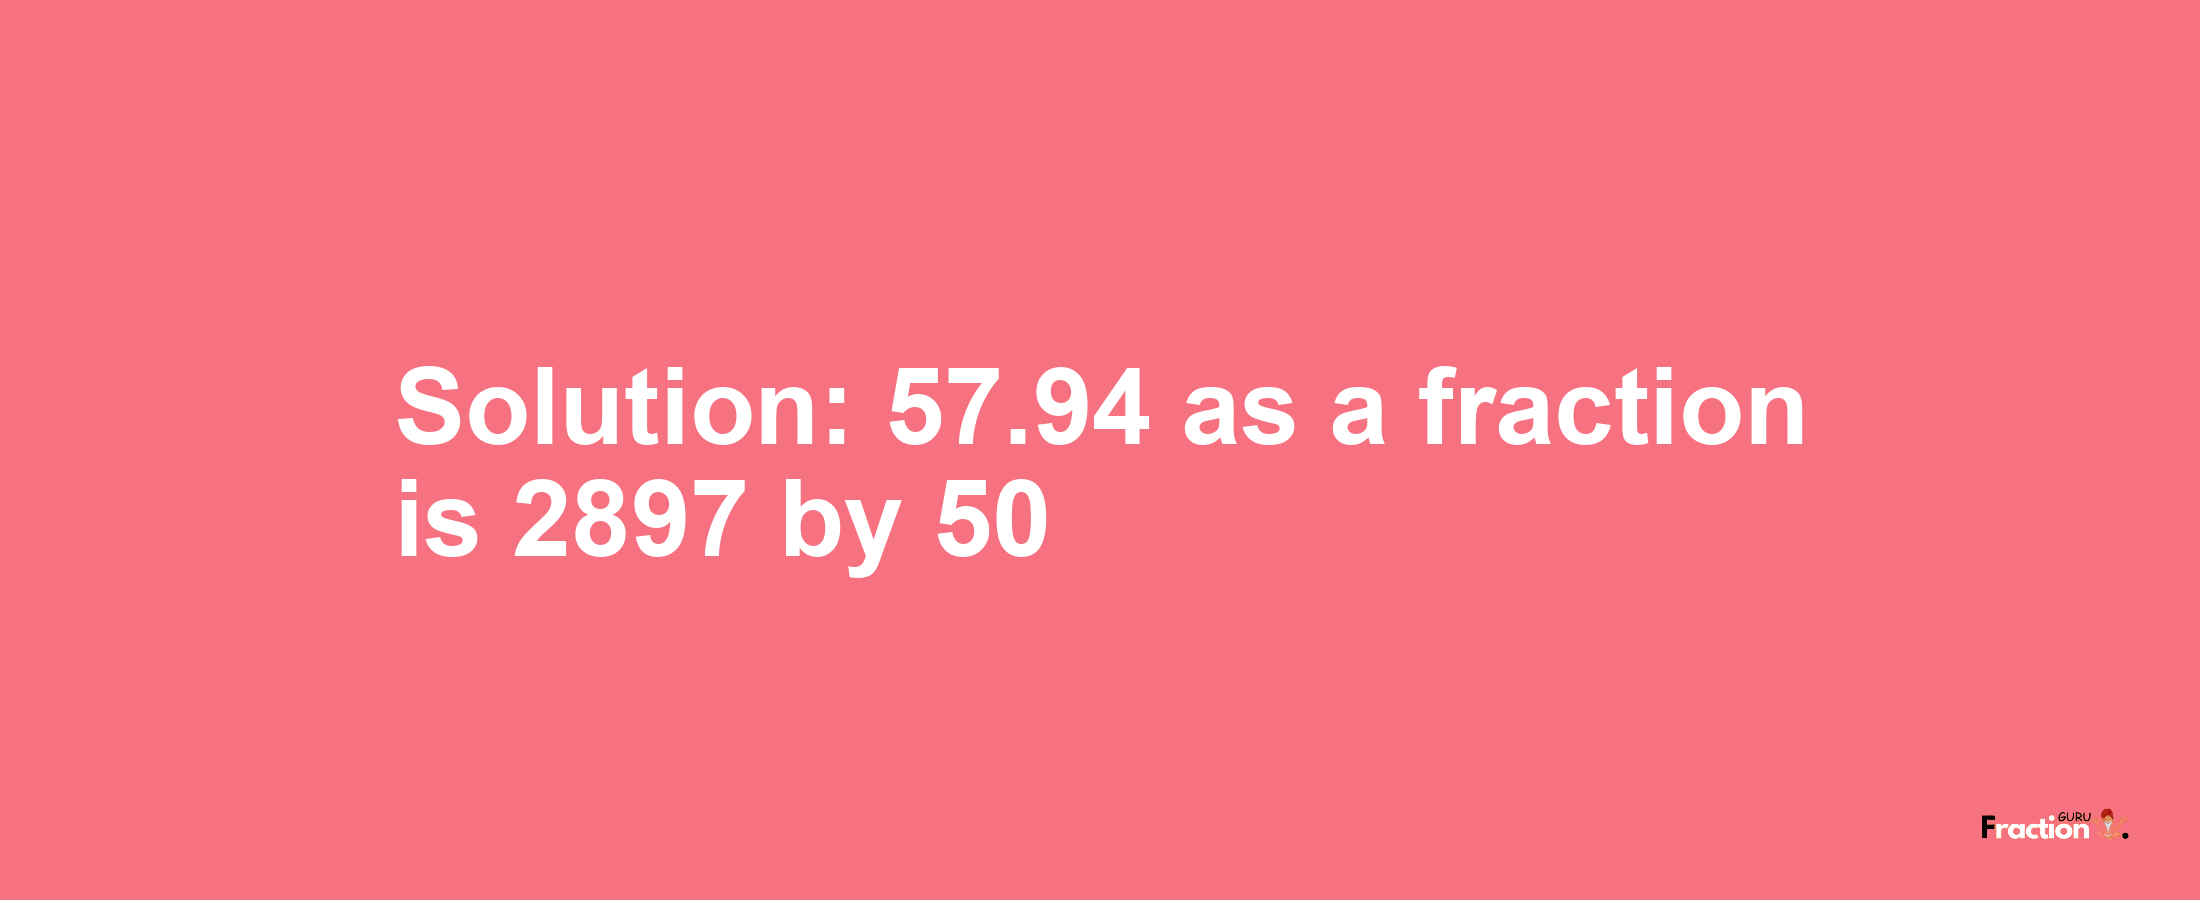 Solution:57.94 as a fraction is 2897/50